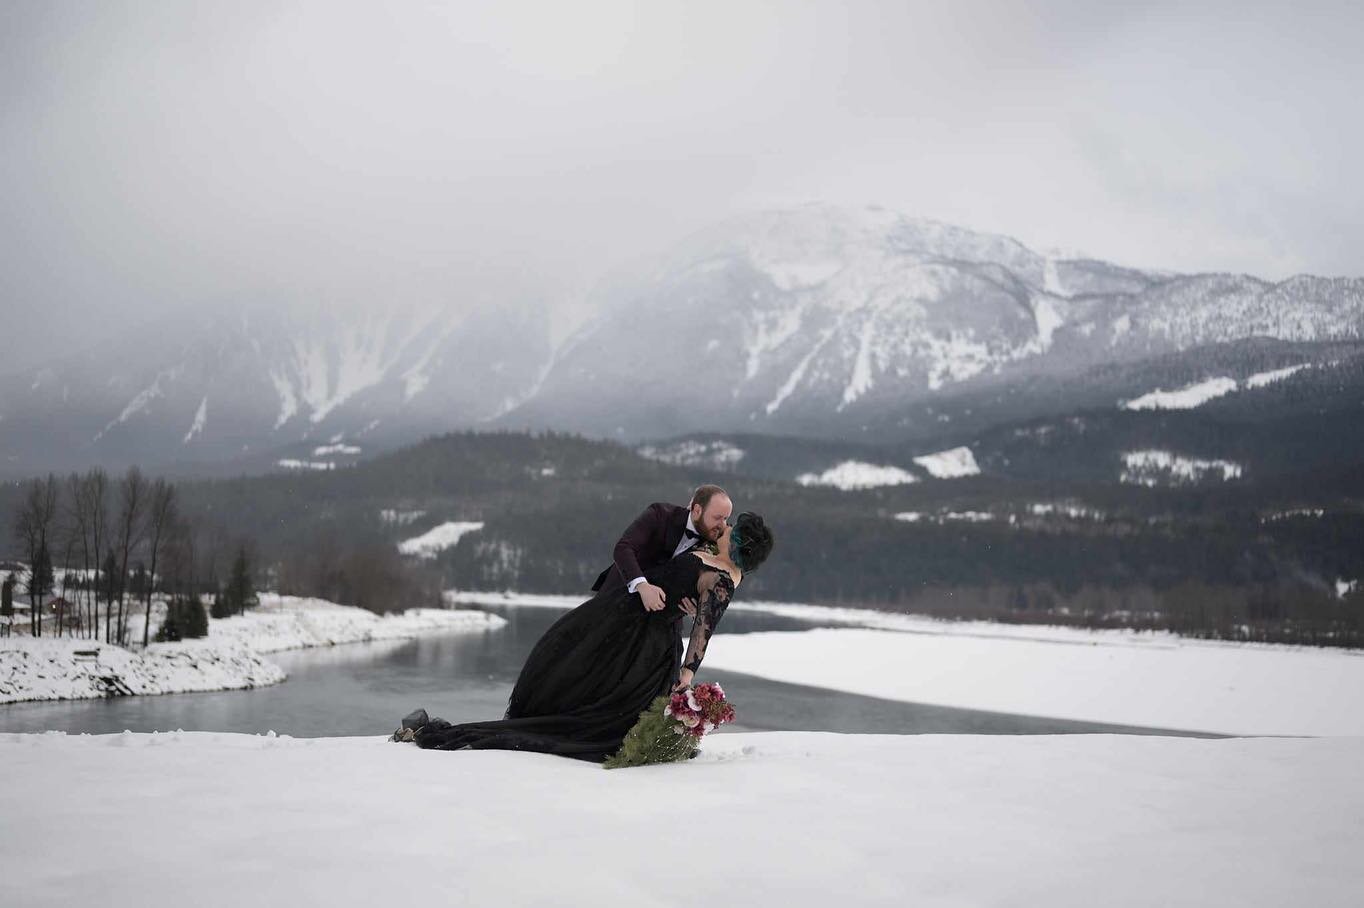 A winter mountain wedding?! Count us in😍🖤

Our lovely bride Kayla and her new hubby look absolutely incredible and we are so happy for them! 

#albertabride #albertaweddings #weddingdress #weddinginspiration #weddingideas #mountainwedding #winterwe